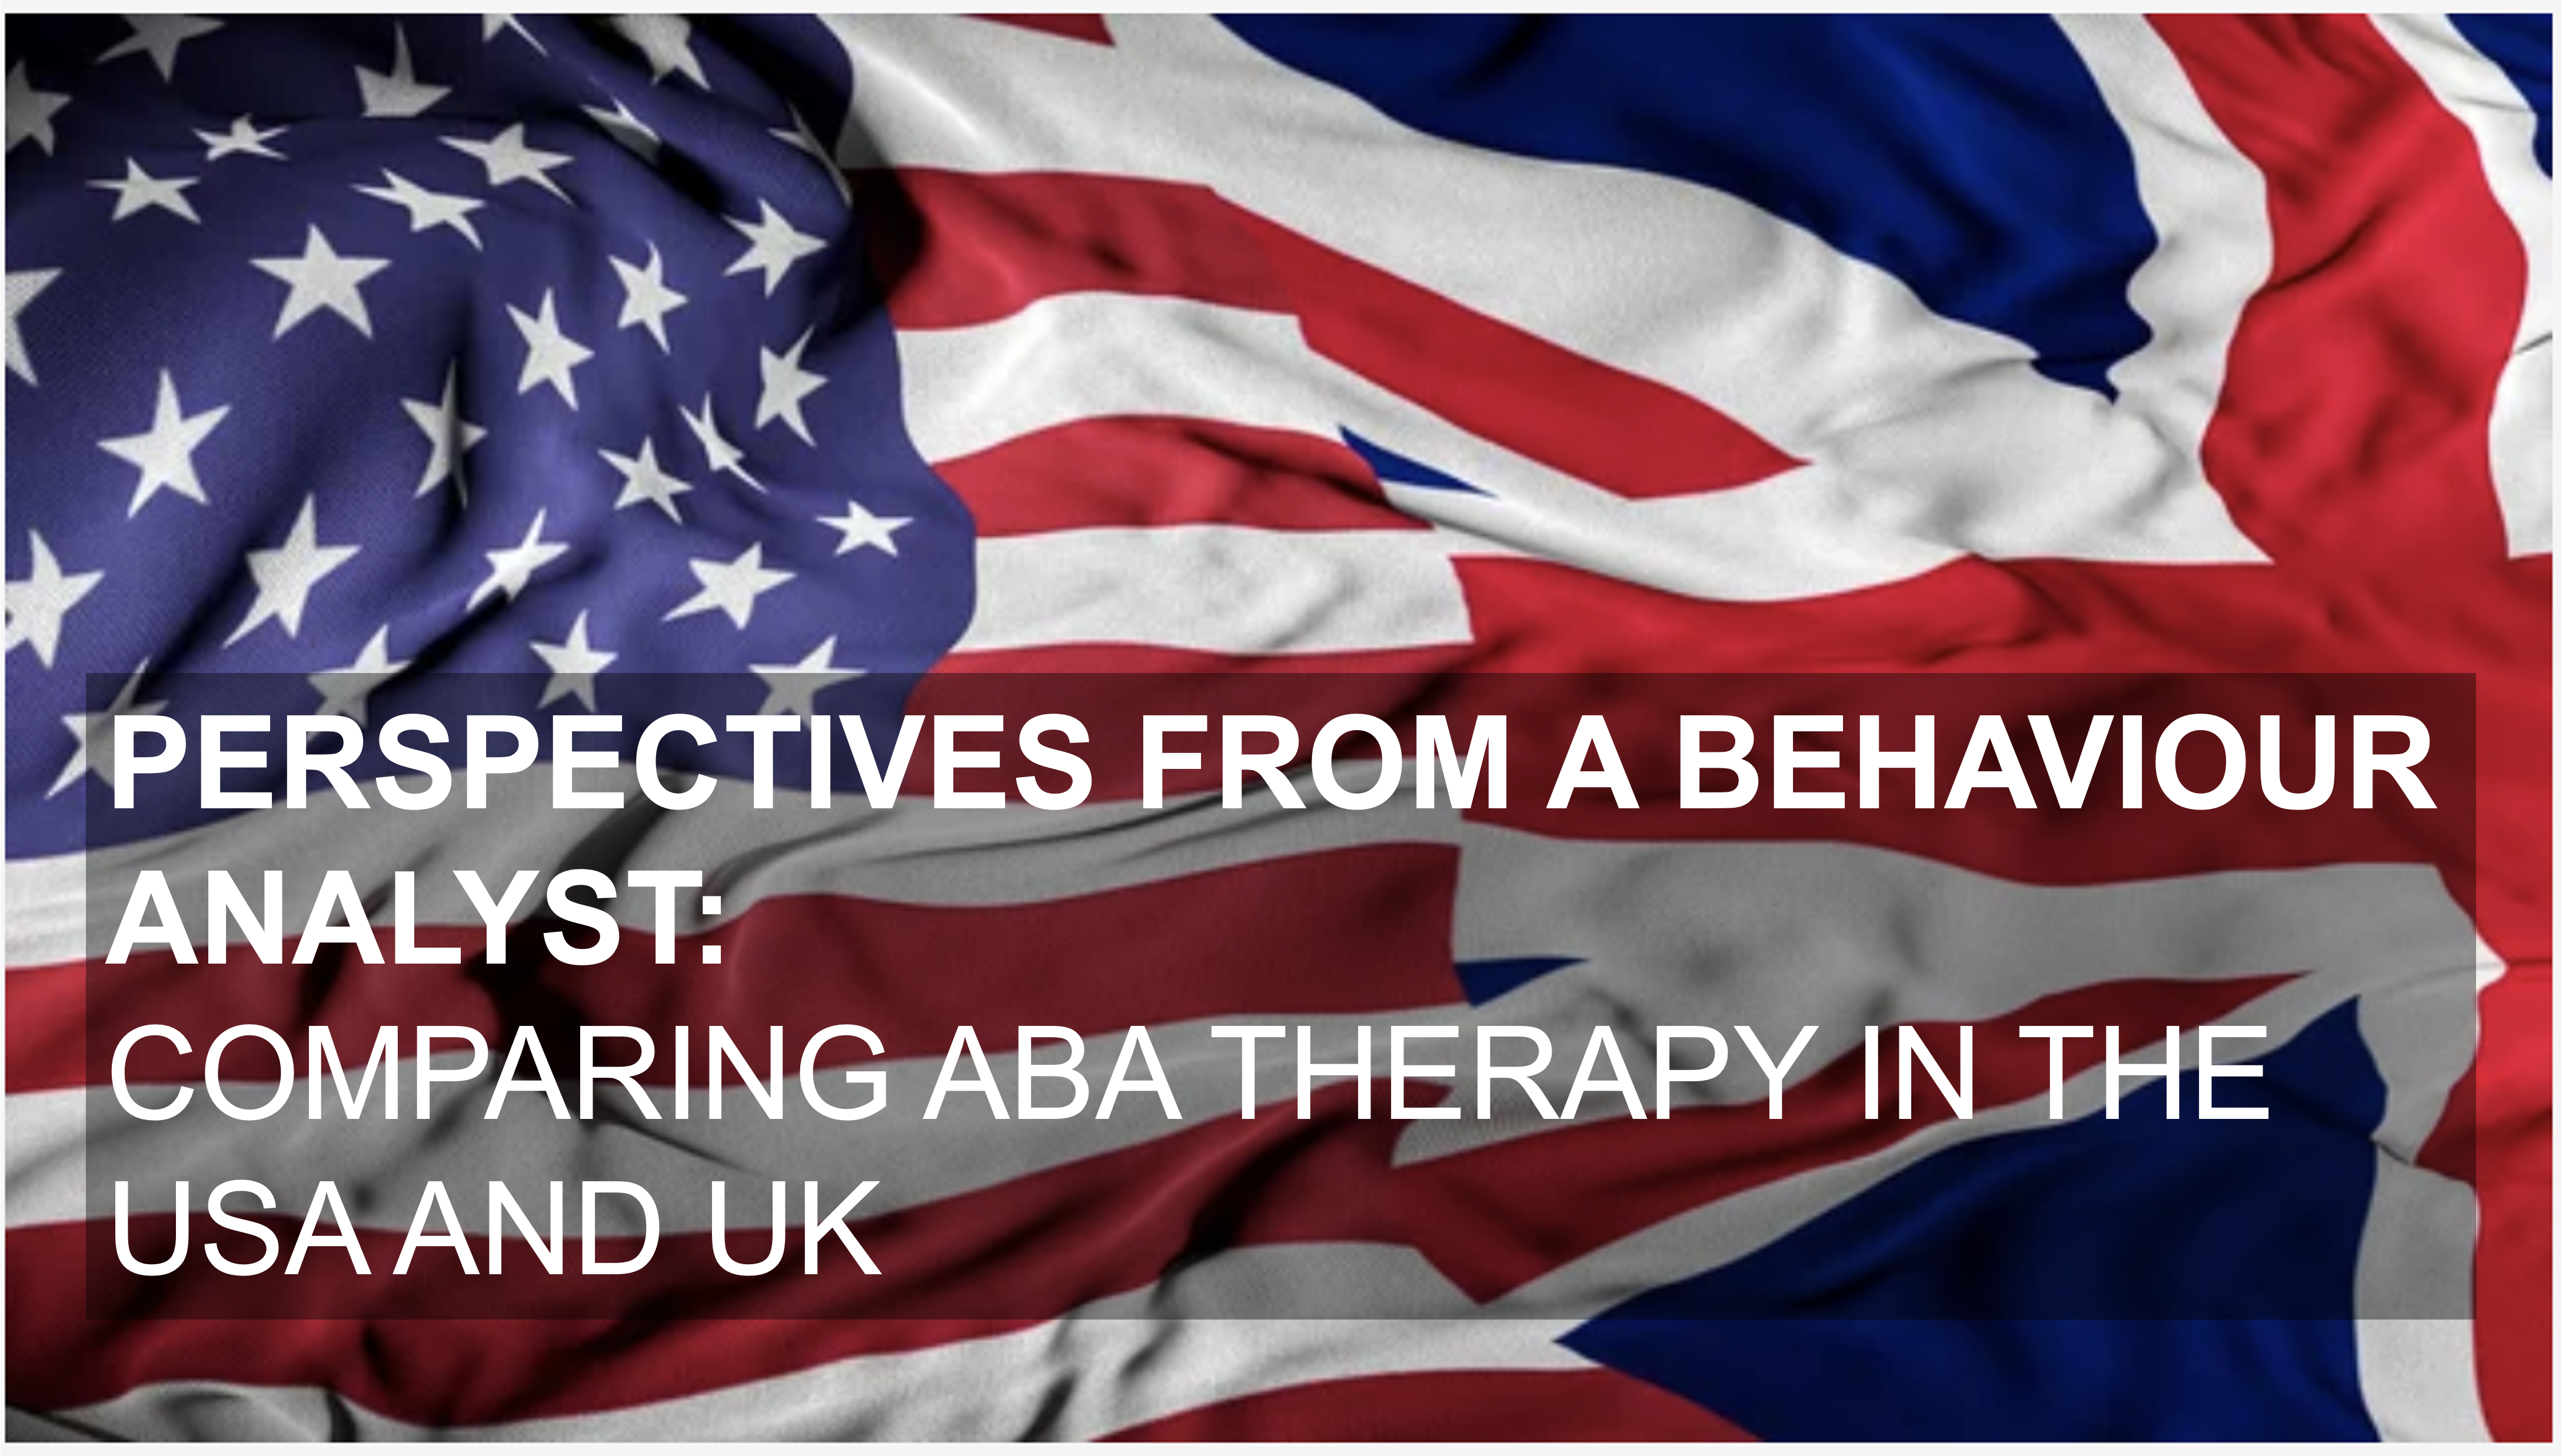 Perspectives from a Behaviour Analyst: Comparing ABA Therapy in the USA and UK